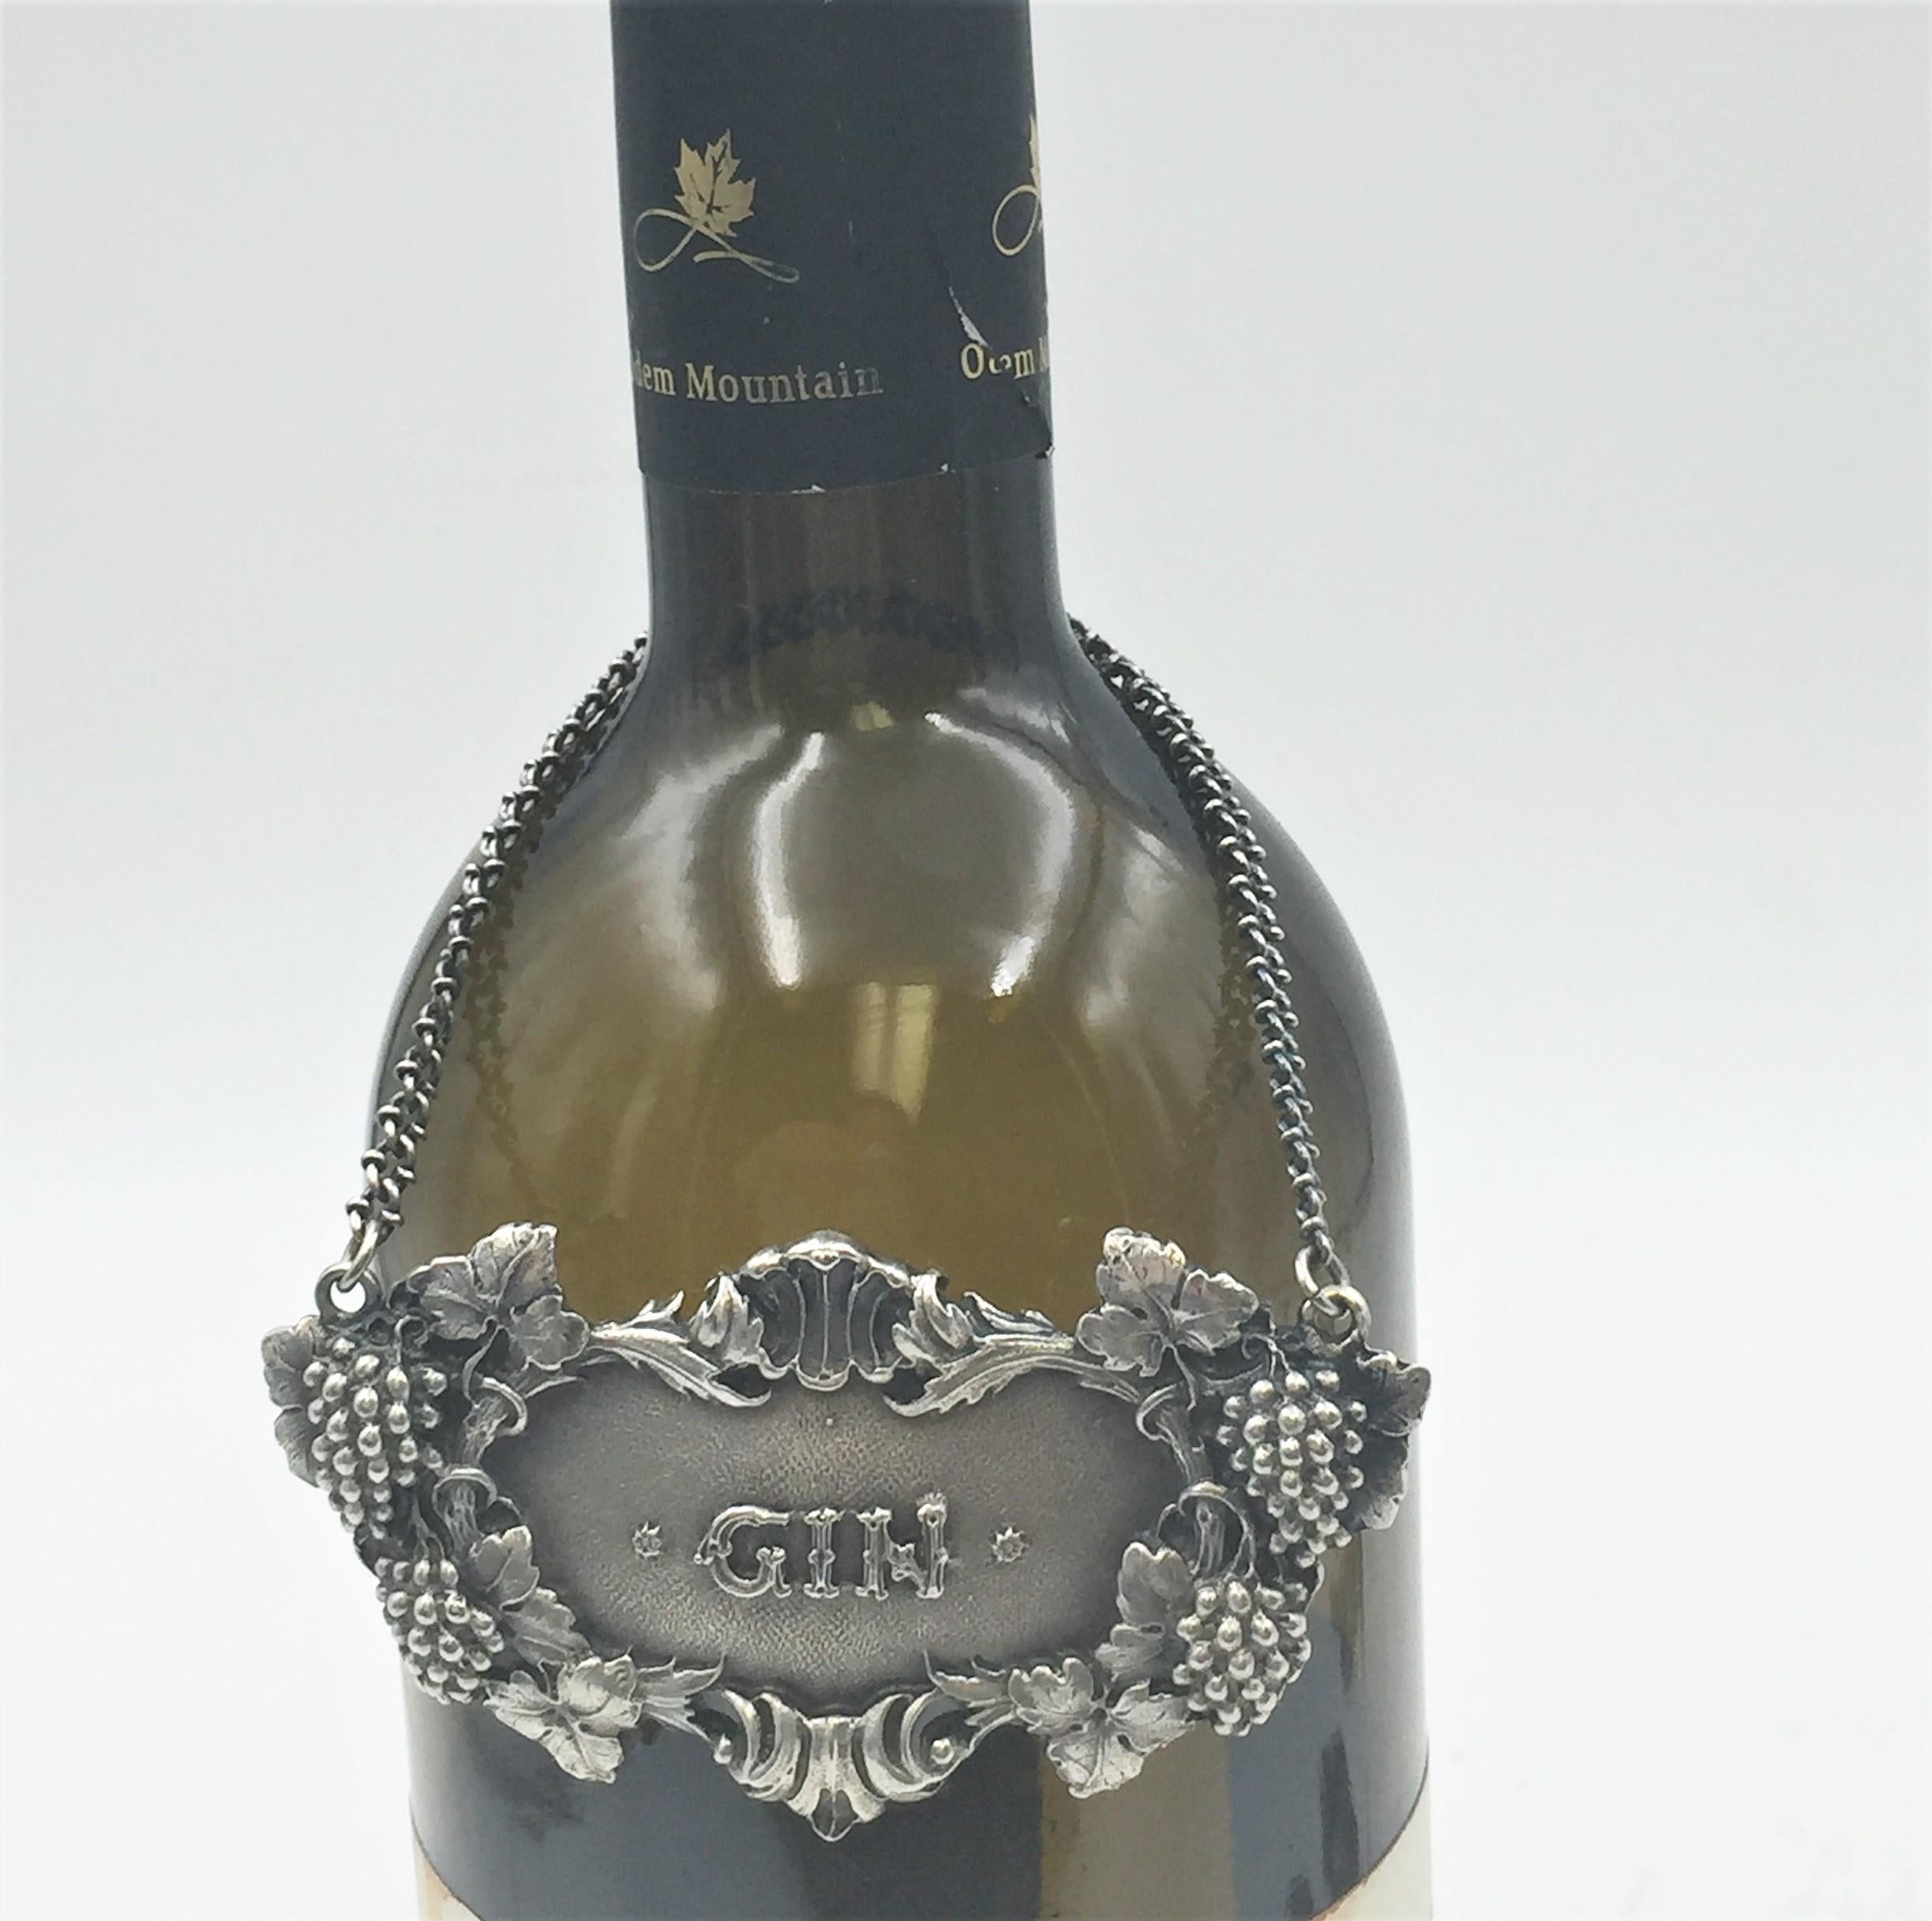 Rare Buccellati sterling silver claret jug bar label. GIN embossed on the front in the center.

Marks on the back: Gianmaria Buccellati (signature and Italian maker's mark), ITALY, 925 (encircled silver purity mark).

It measures 3in x 1.5in.